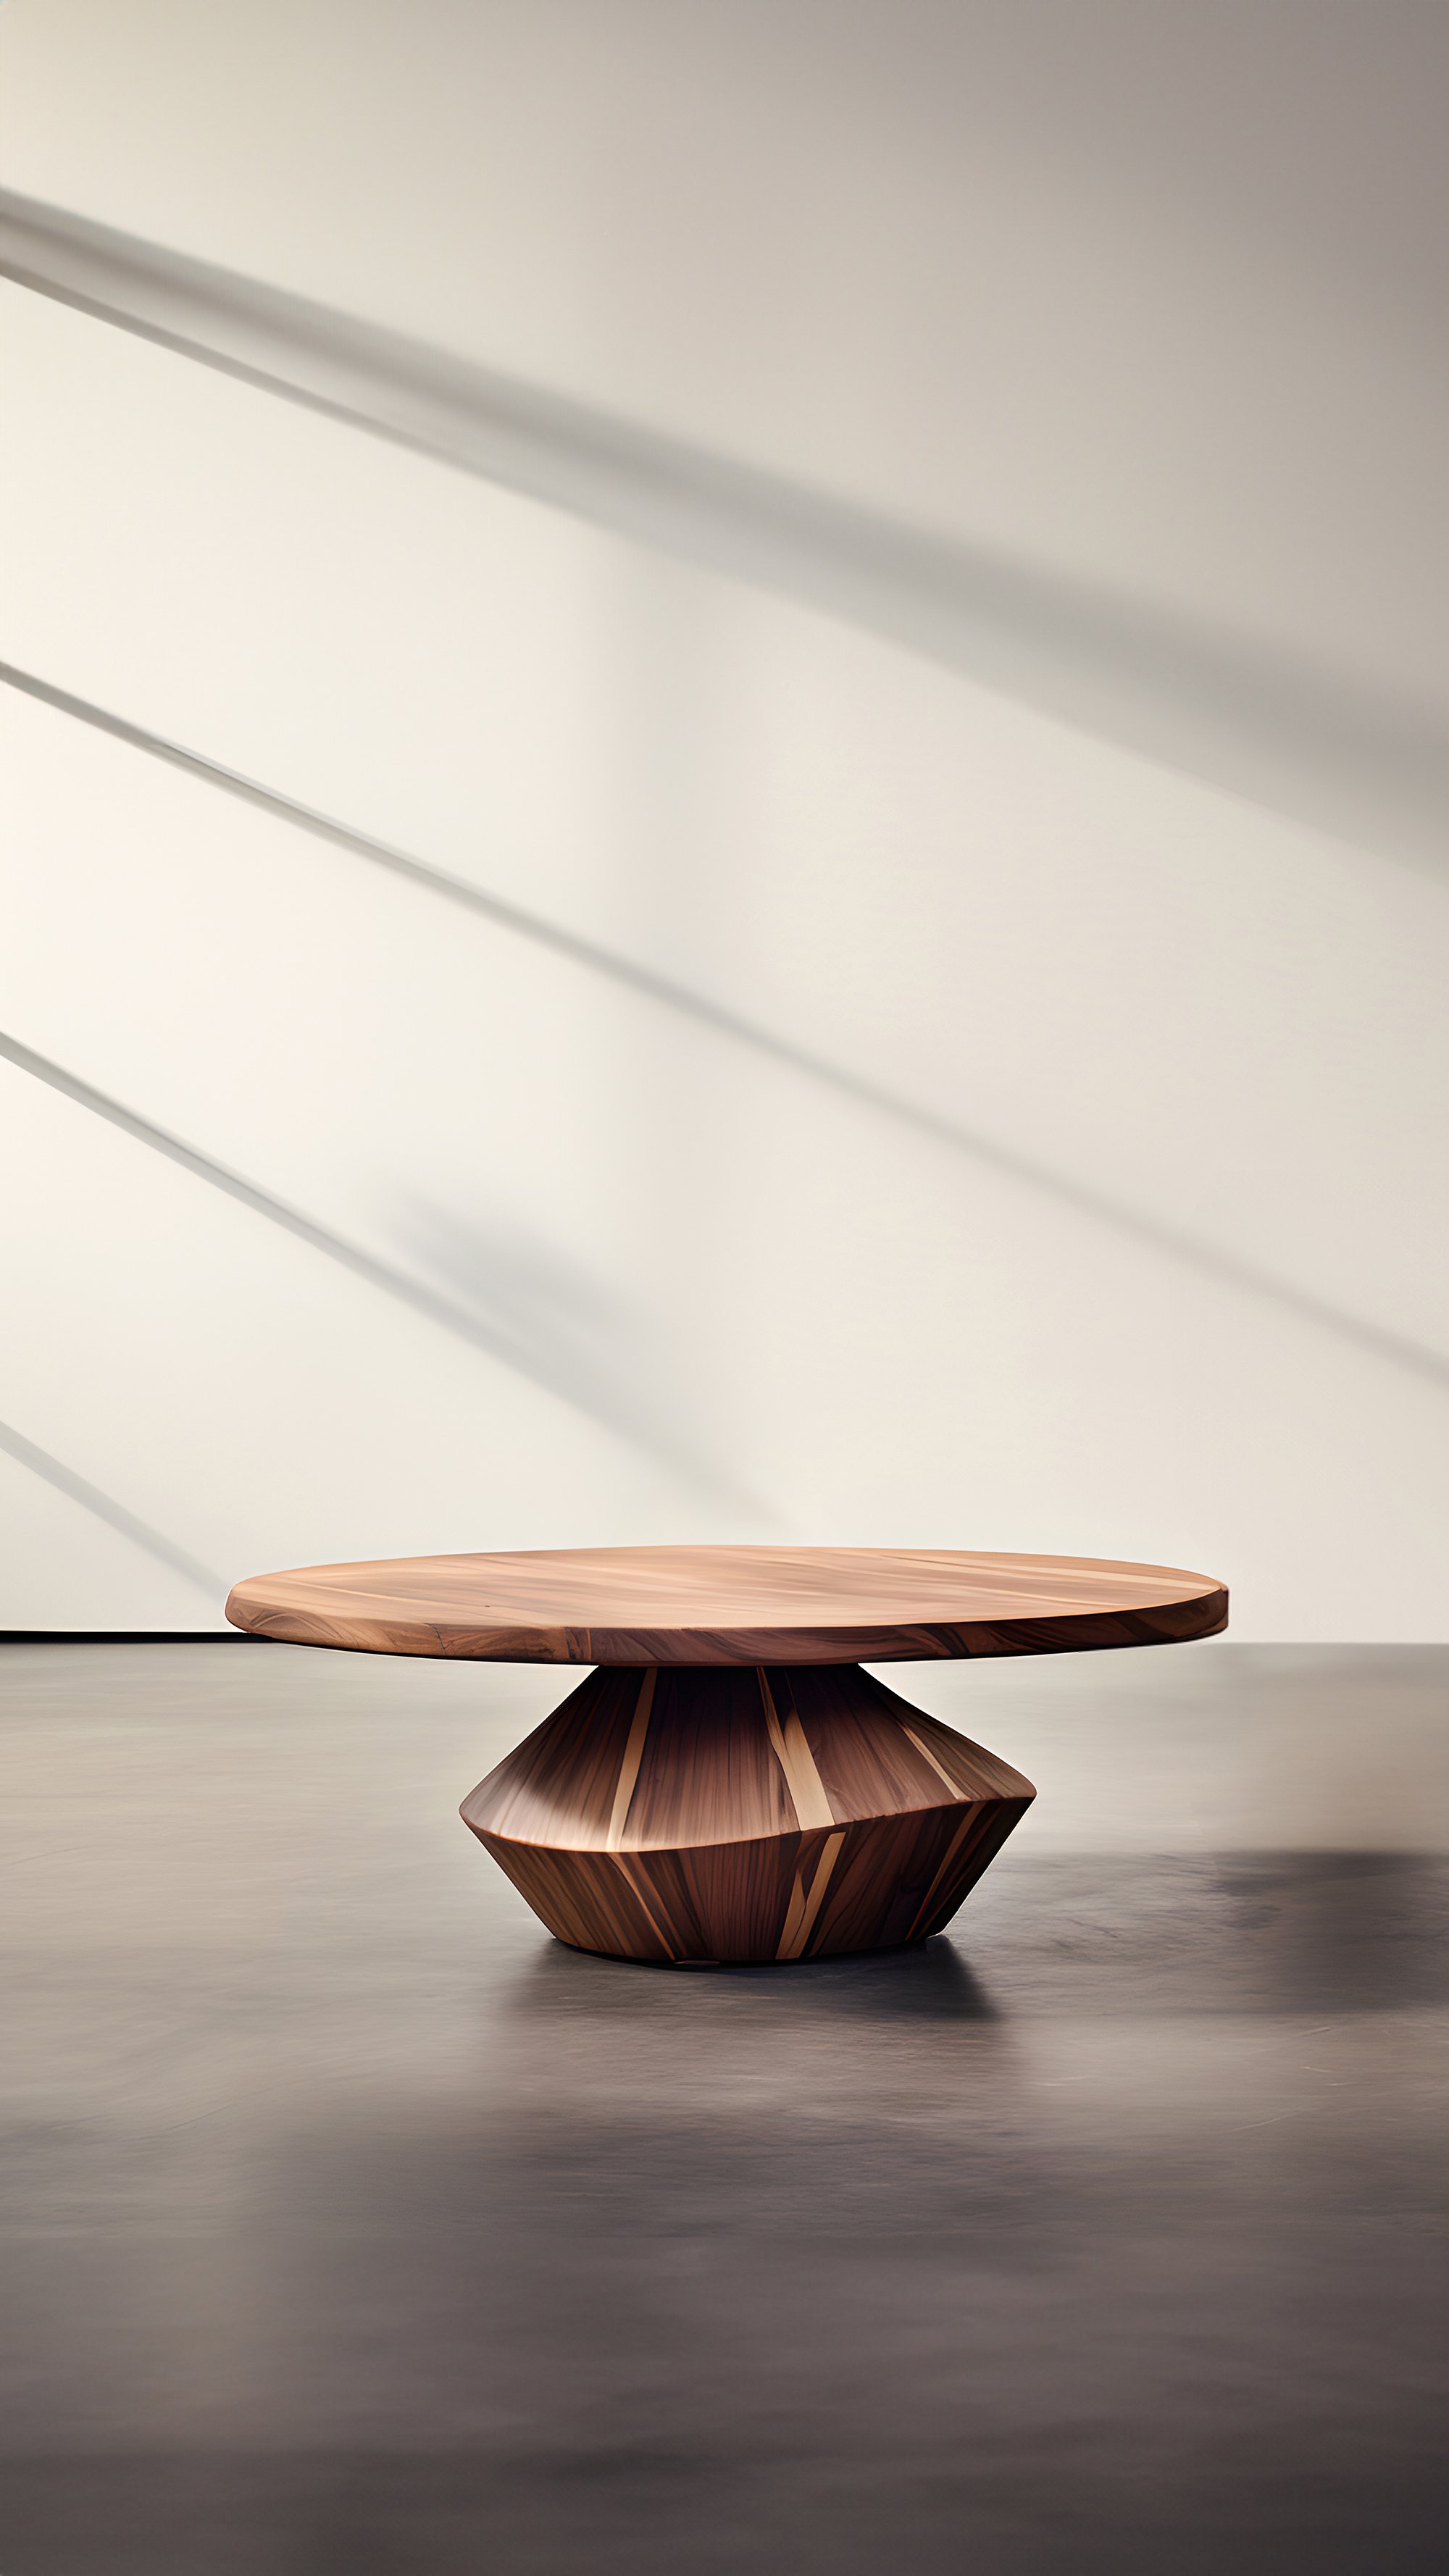 Sculptural Coffee Table Made of Solid Wood, Center Table Solace S43 by Joel Escalona — 6.jpg